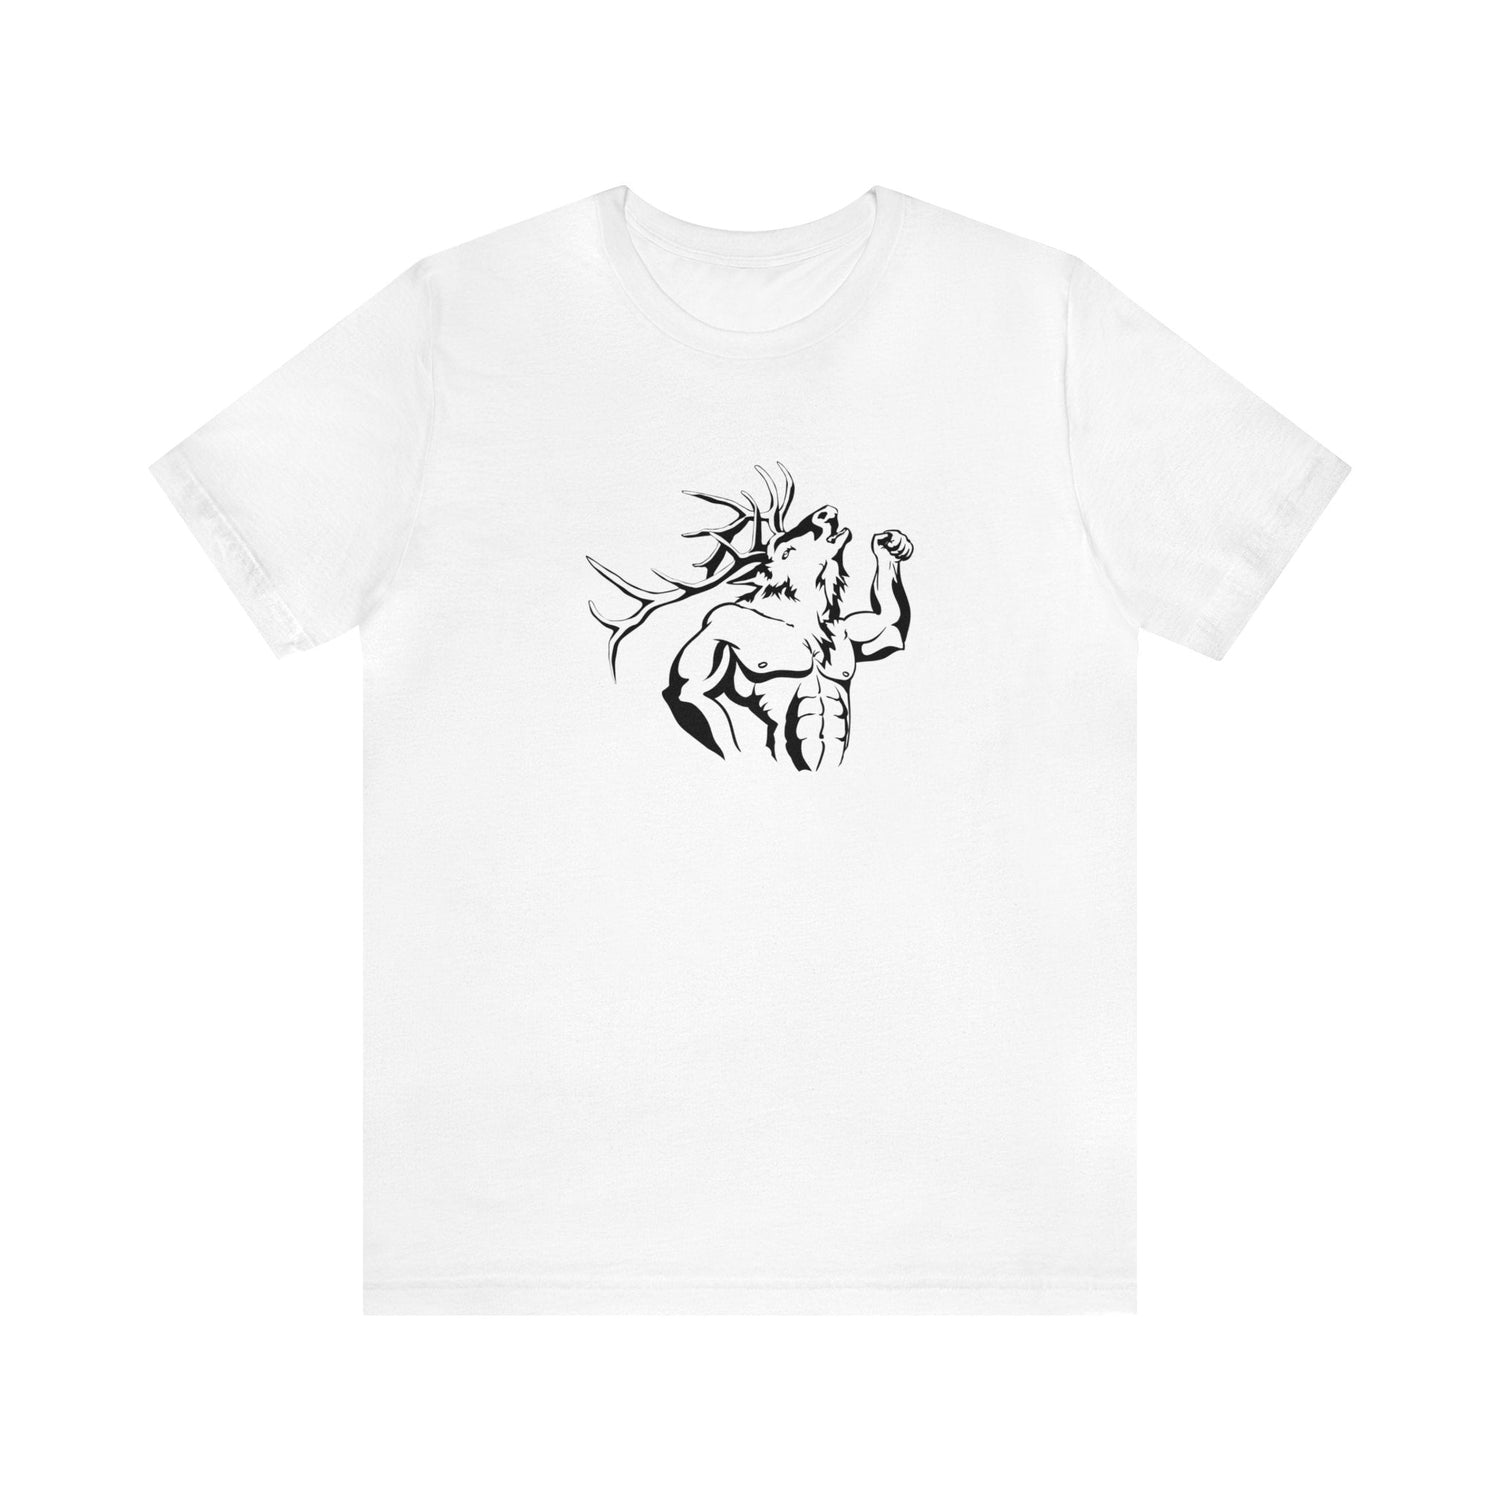 Western elk hunting t-shirt, color white, front design placement